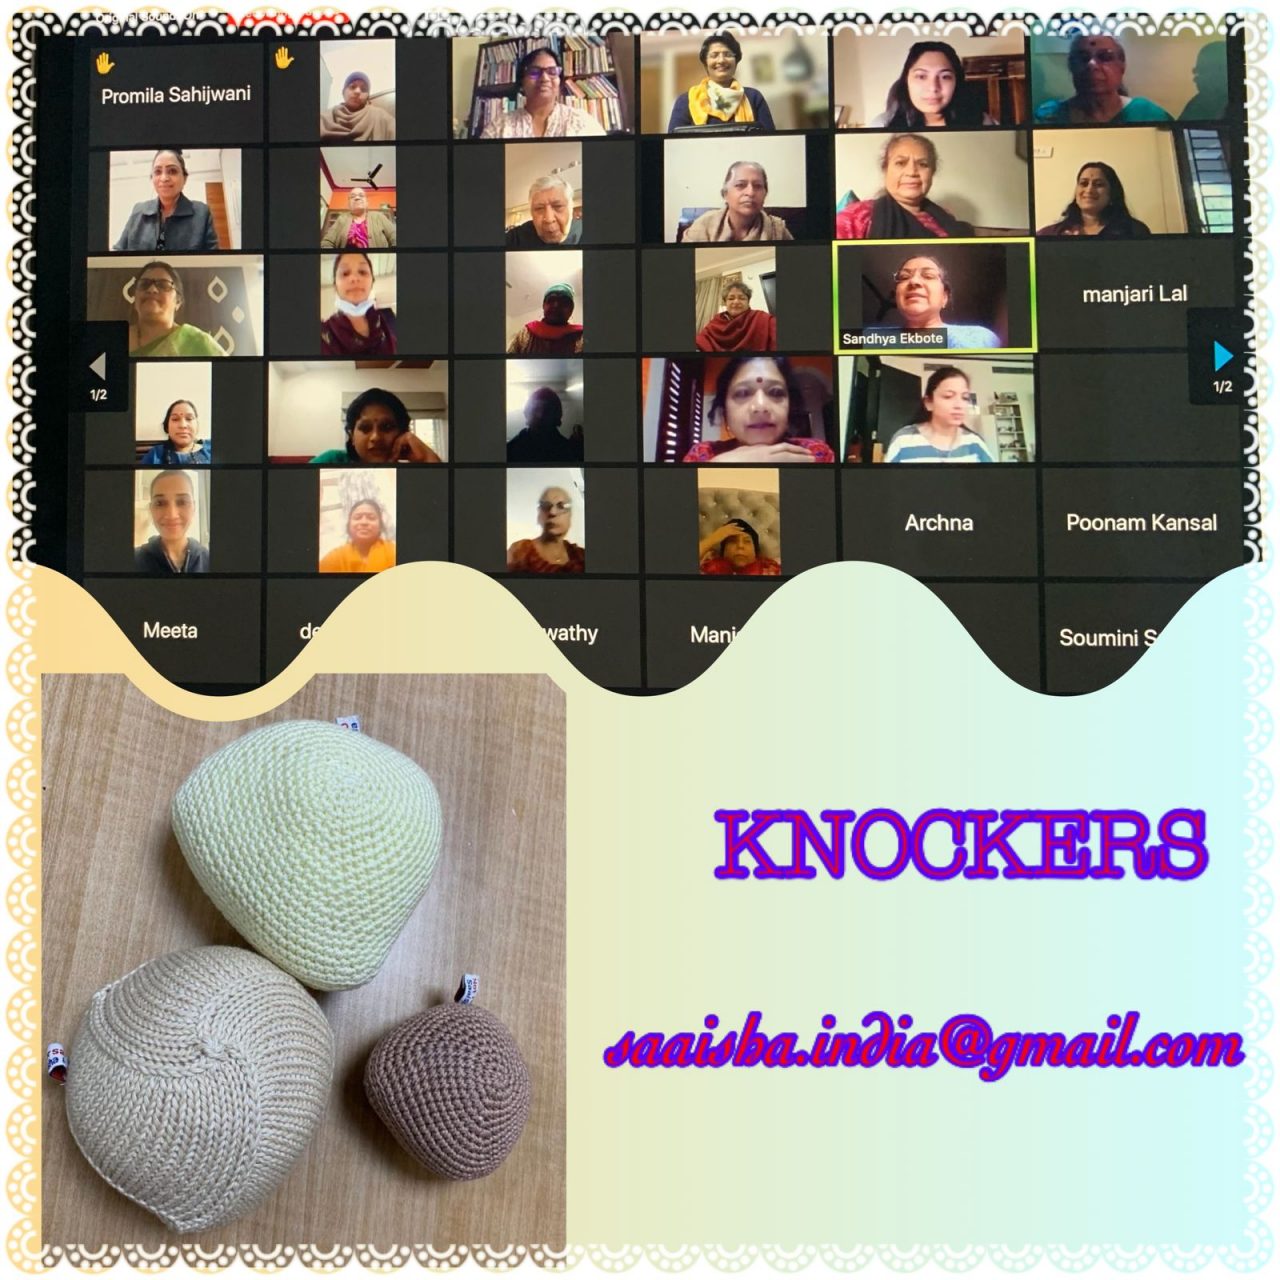 KNOCKERS-IS-A-KNOCK-OUT-A-Blessing-for-Patients-after-Mastectomy-1280x1280.jpeg